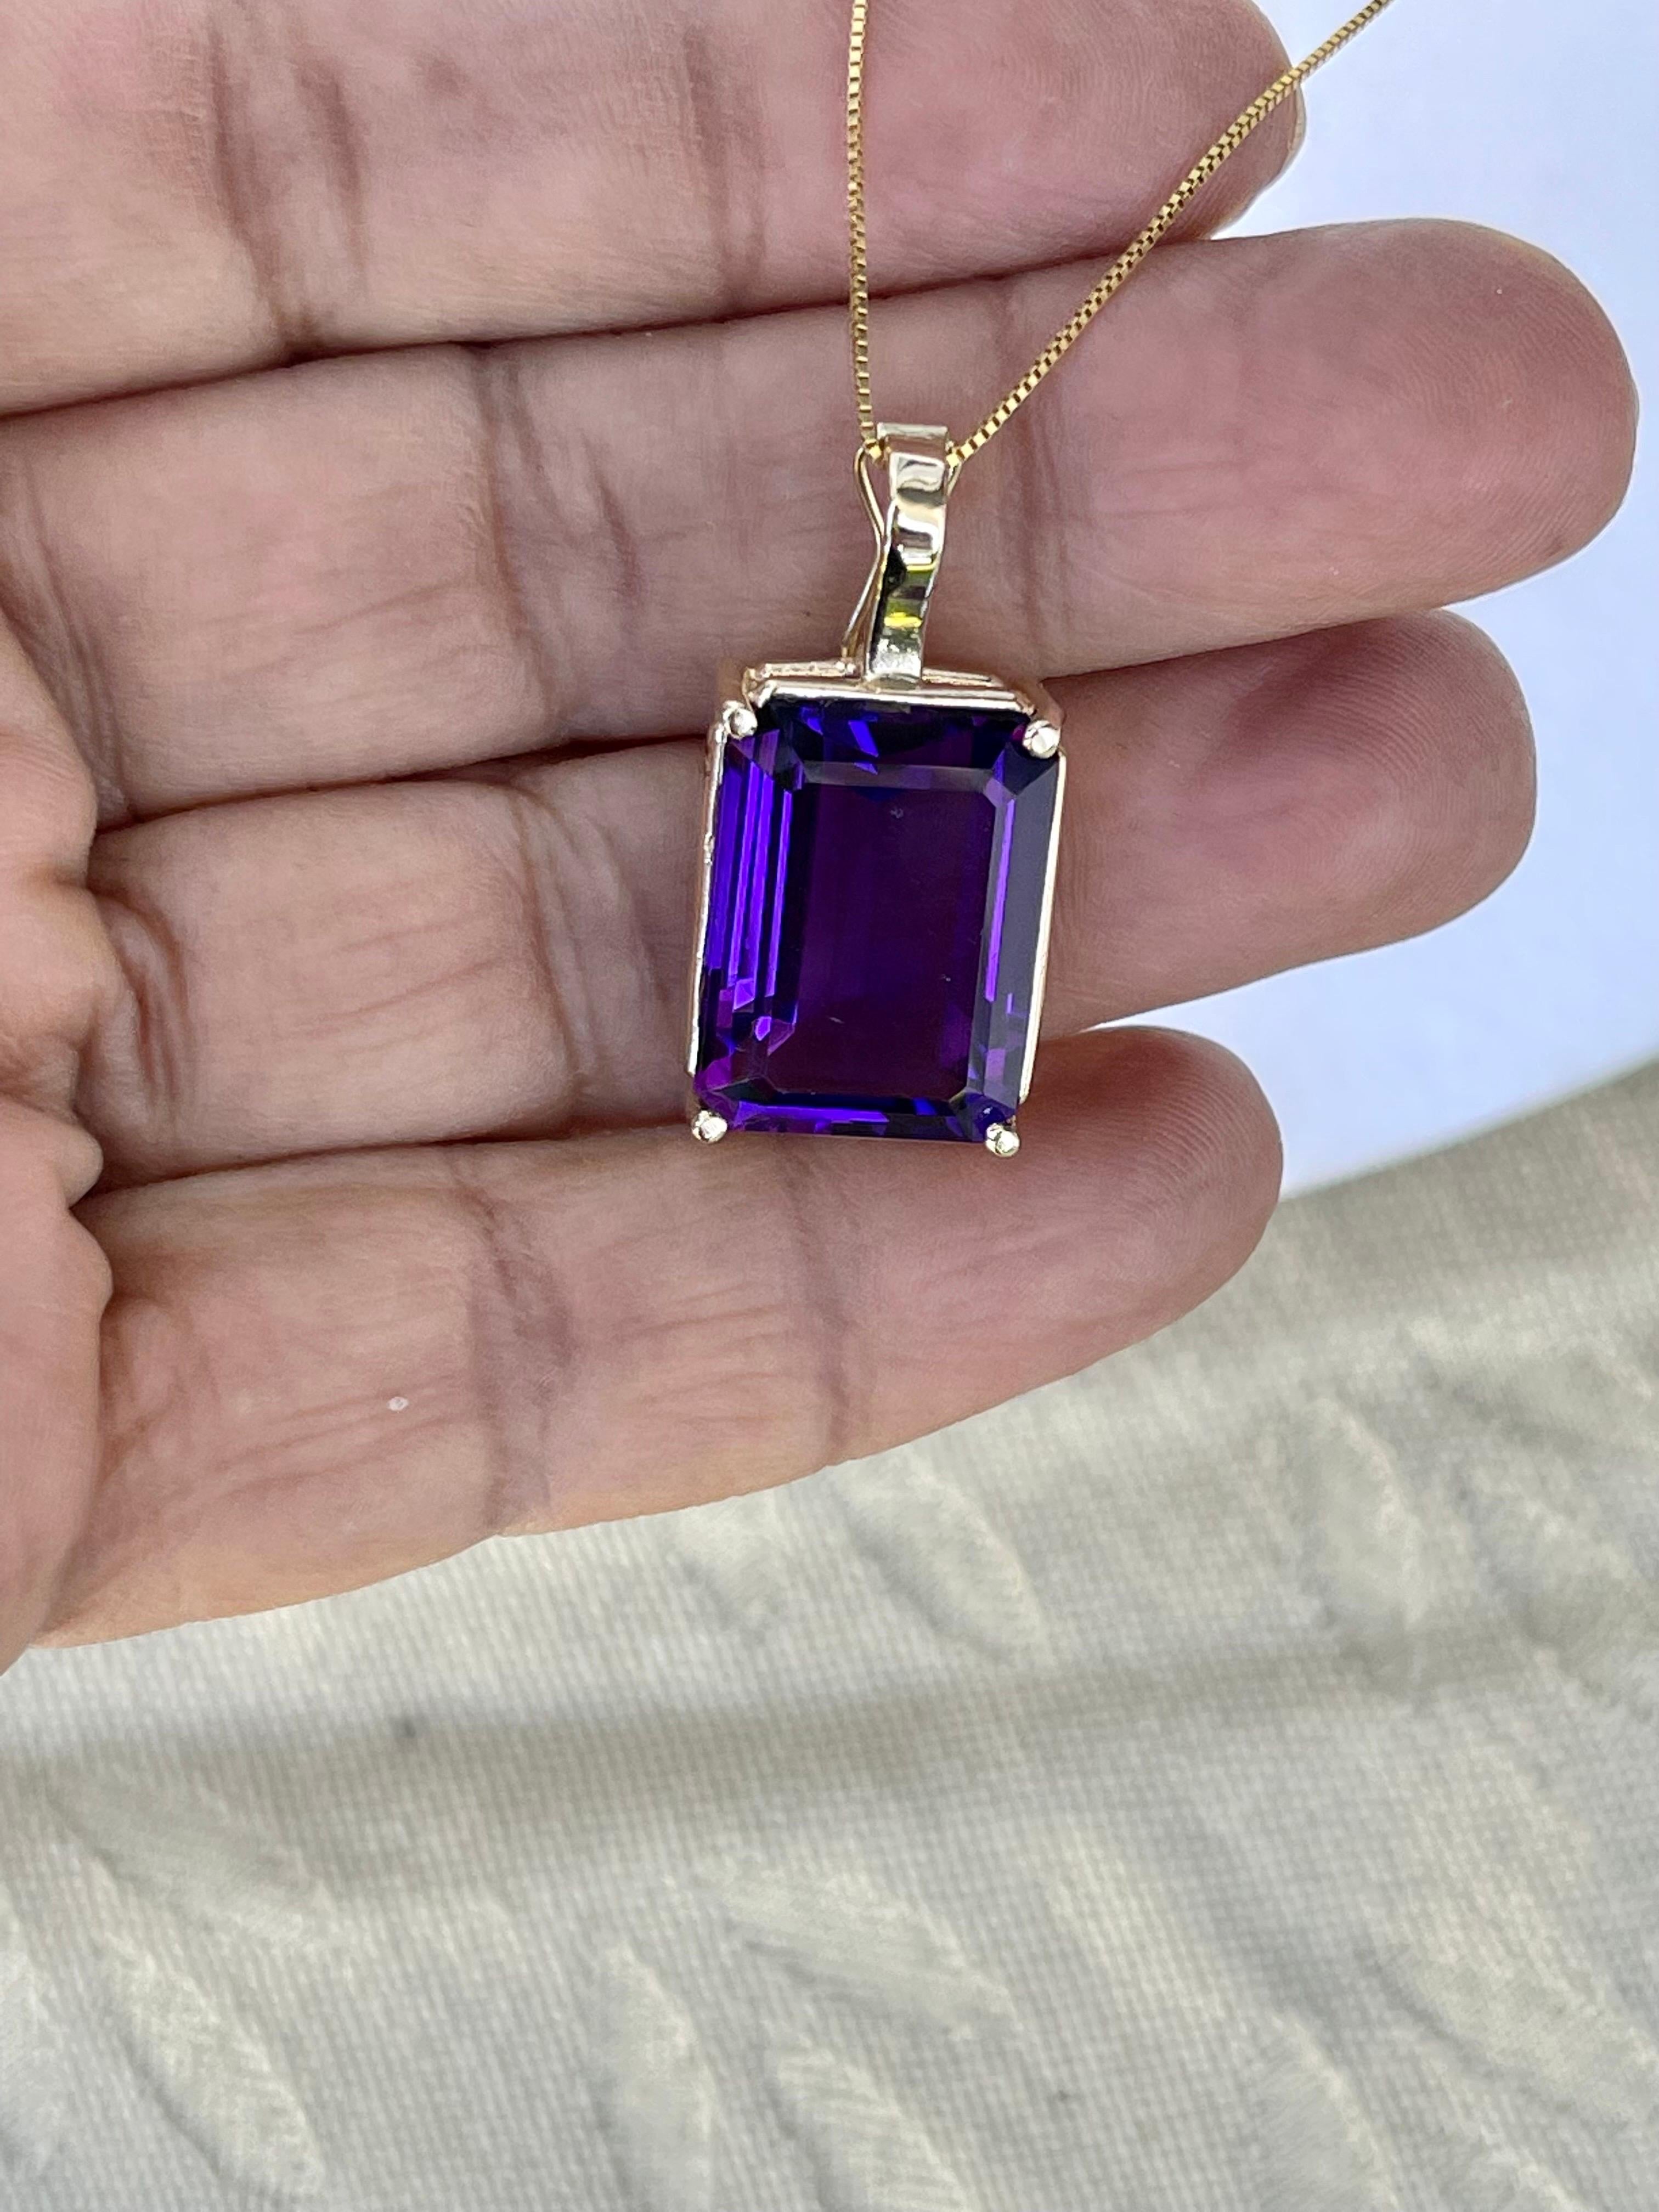 12 Ct Emerald Cut Amethyst Pendant /Necklace + 14 Kt Yellow Gold Chain Vintage For Sale 2